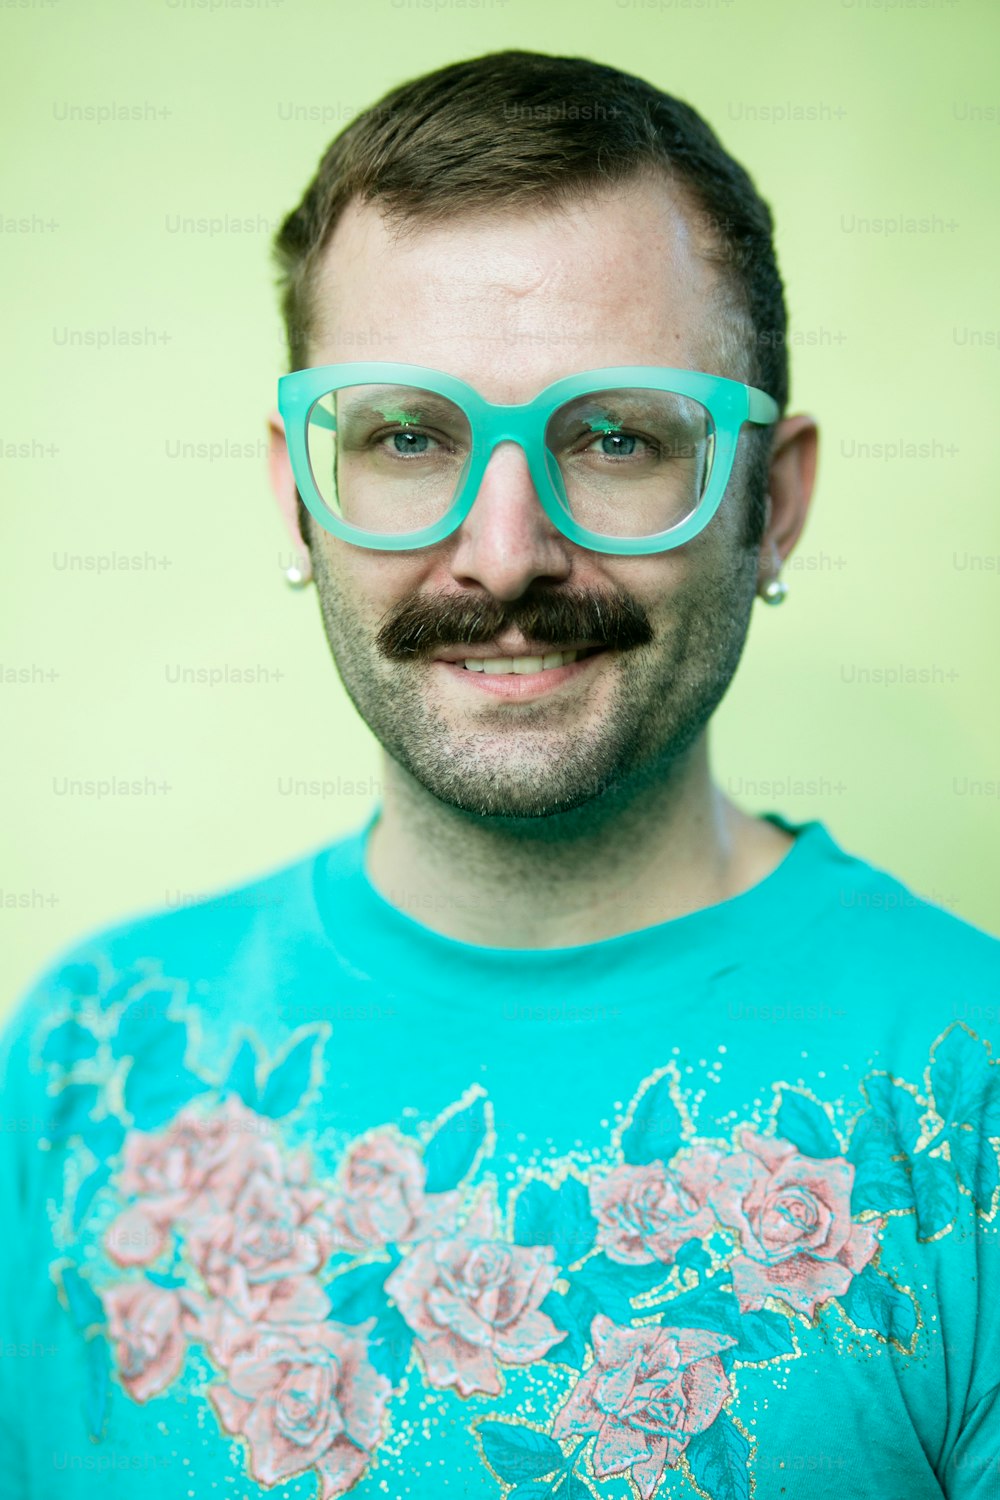 a man with glasses and a mustache wearing a t - shirt